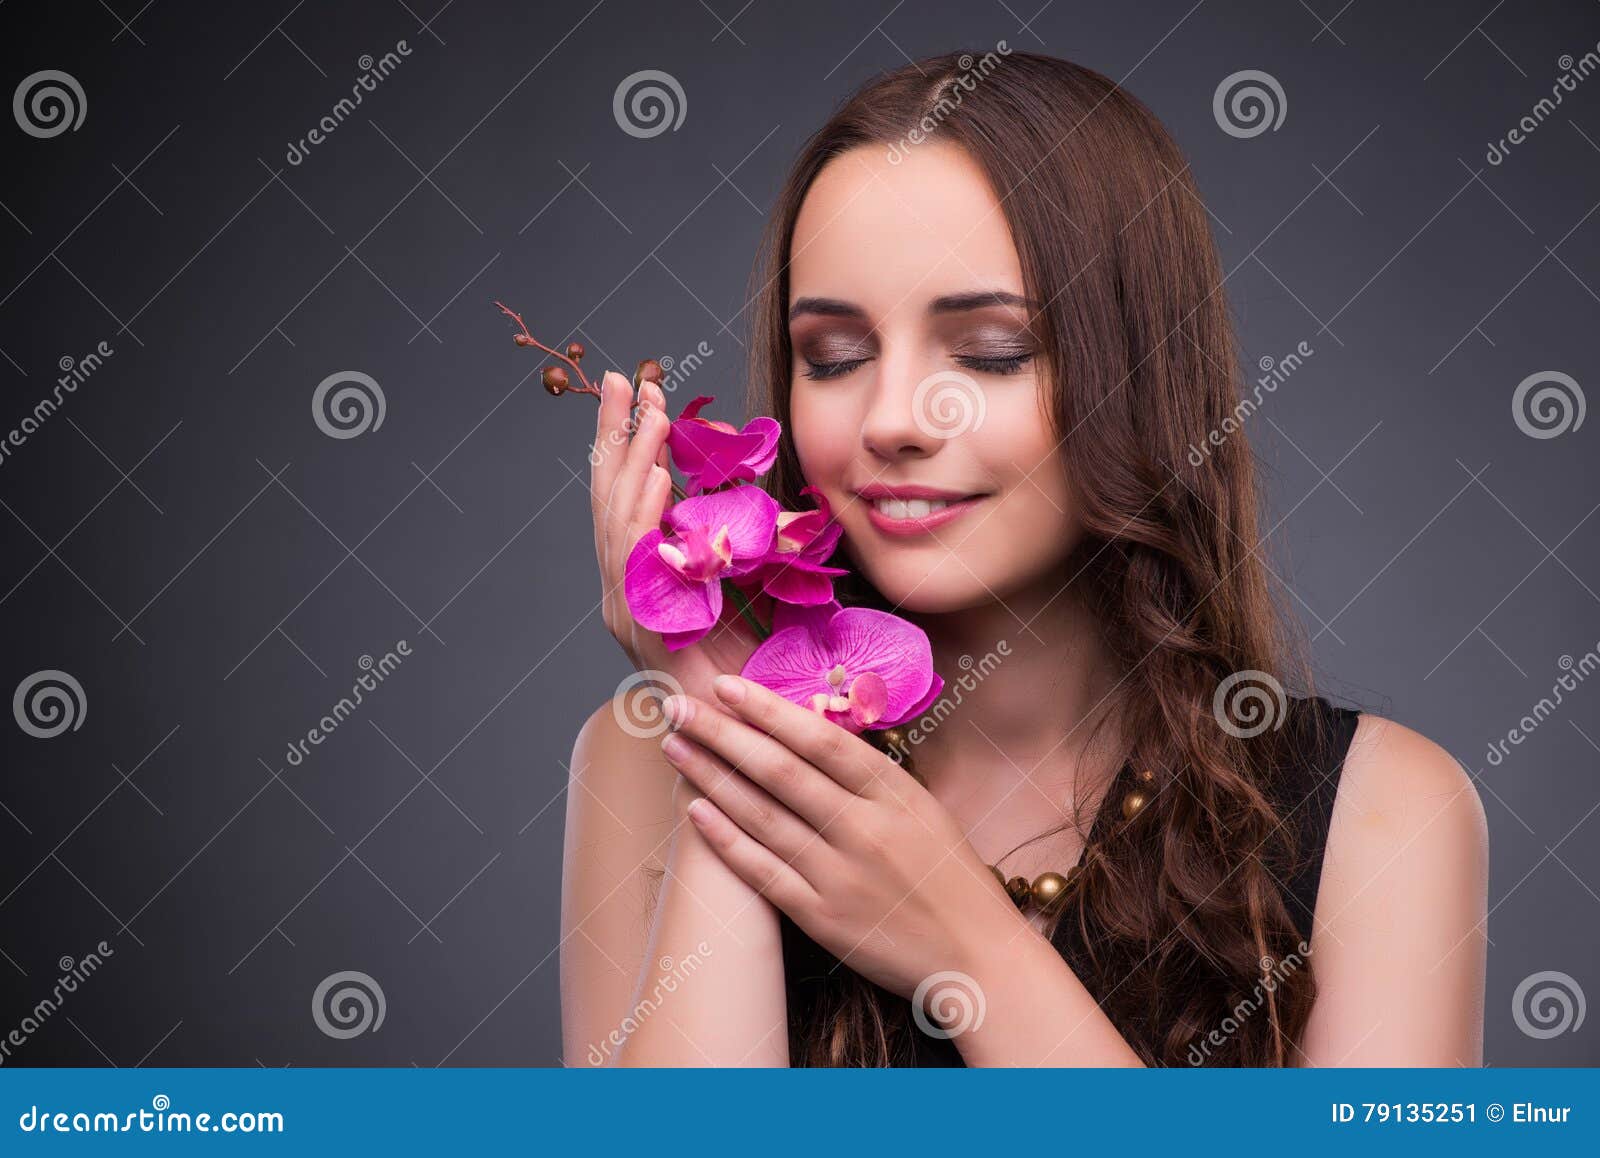 The Beautiful Woman Applying Make Up In Fashion Concept Stock Image Image Of Fashion Face